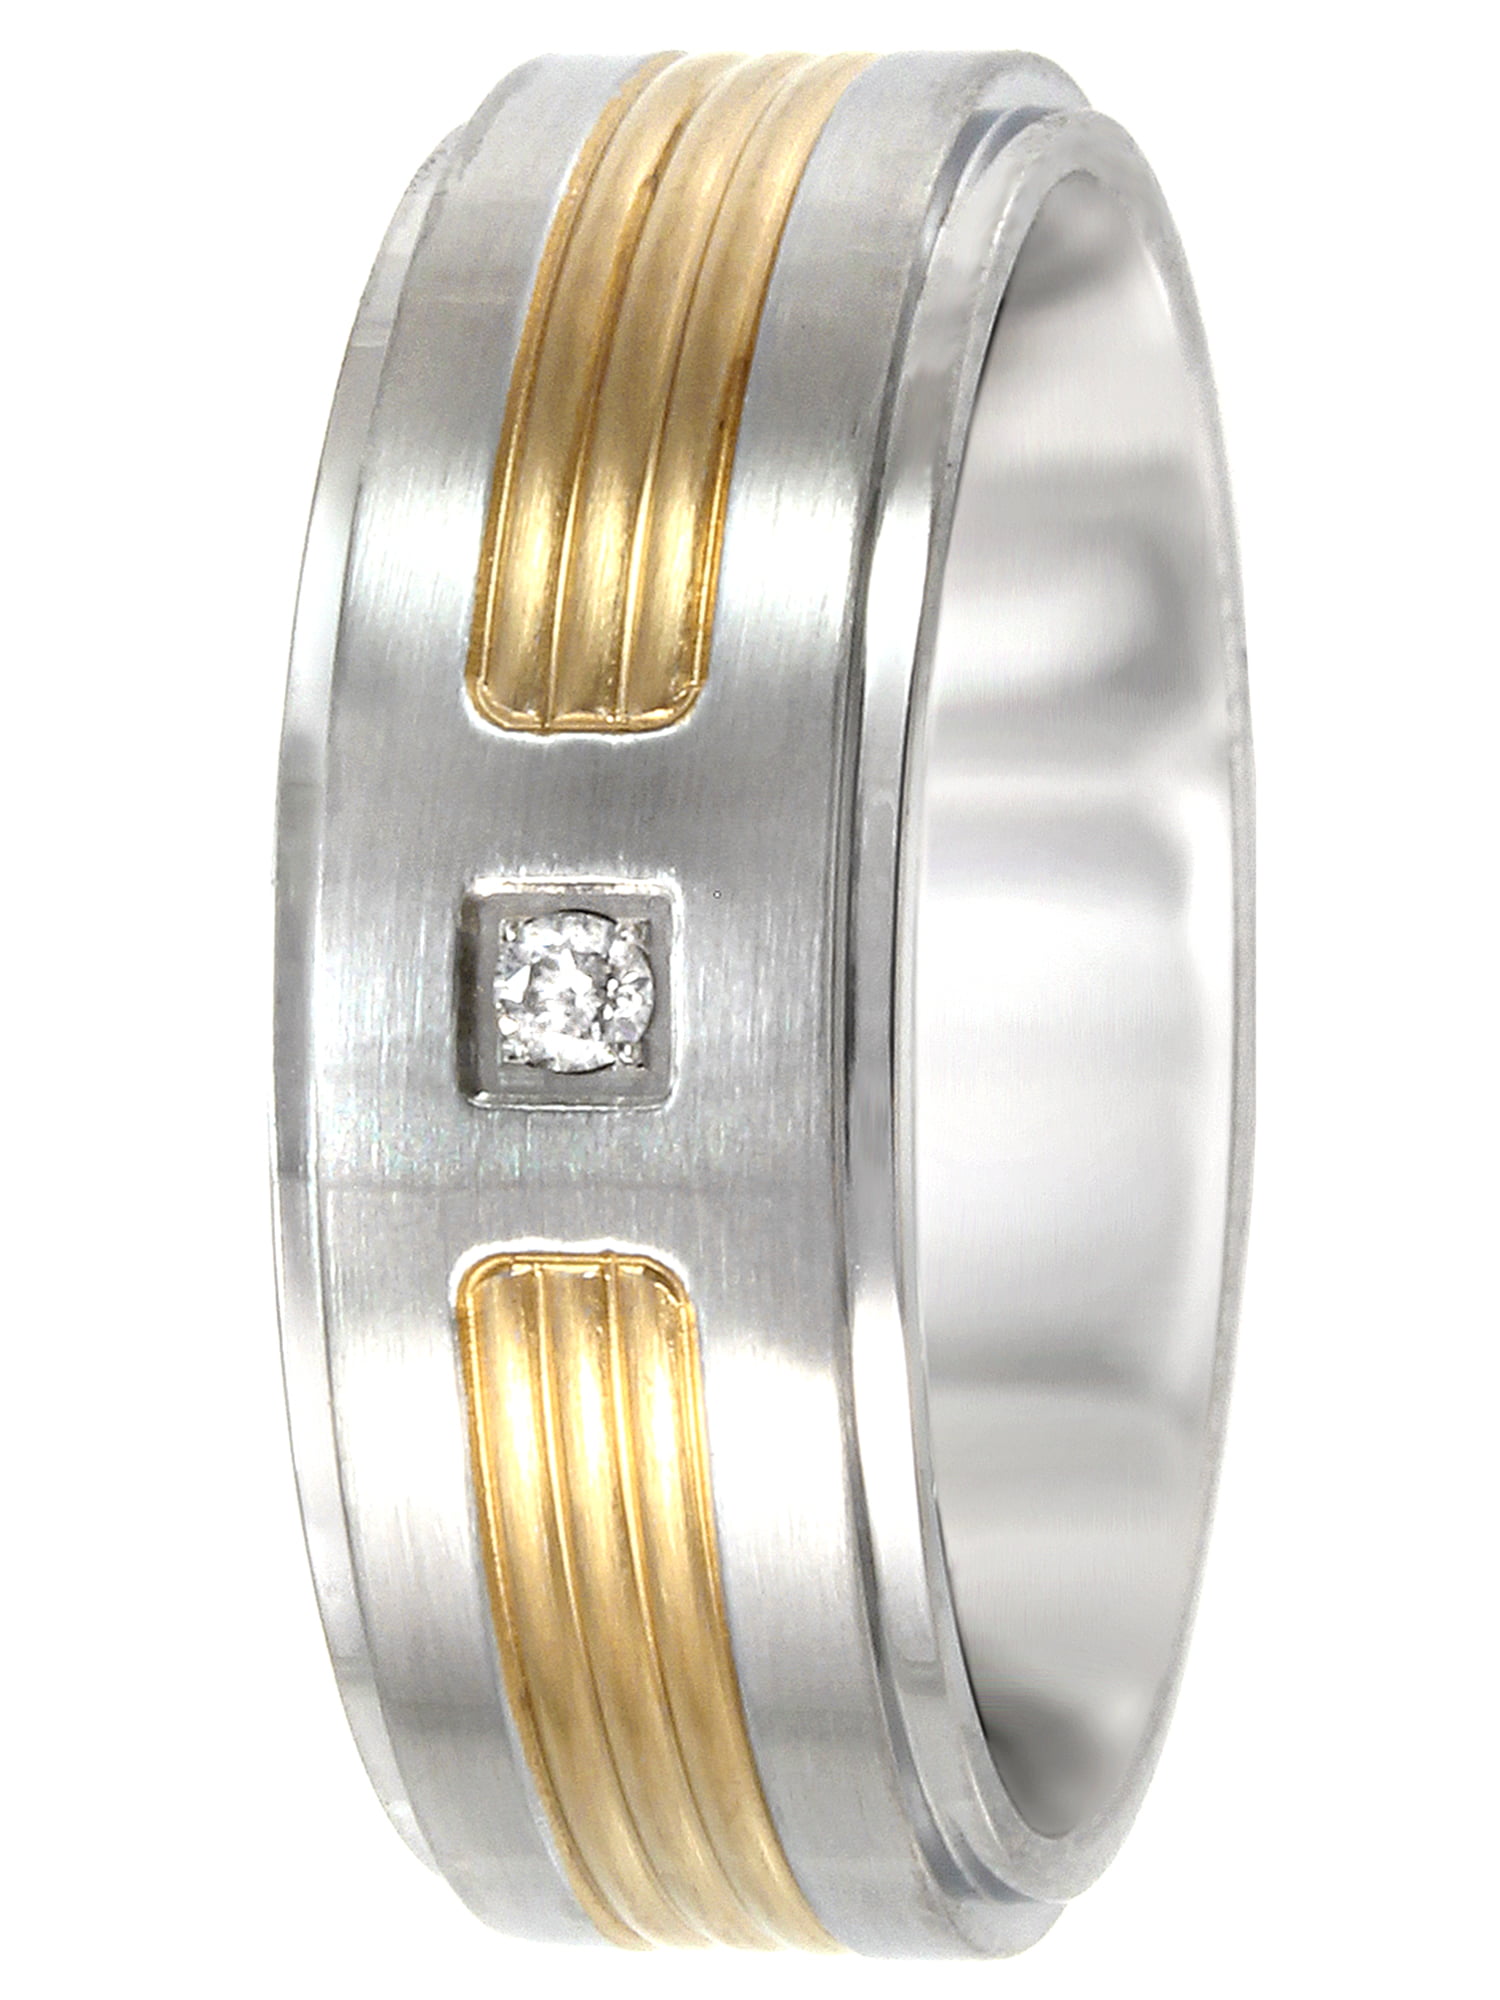 ONLINE - Men's Stainless Steel Diamond Accent Two-Tone Ring, 8mm ...